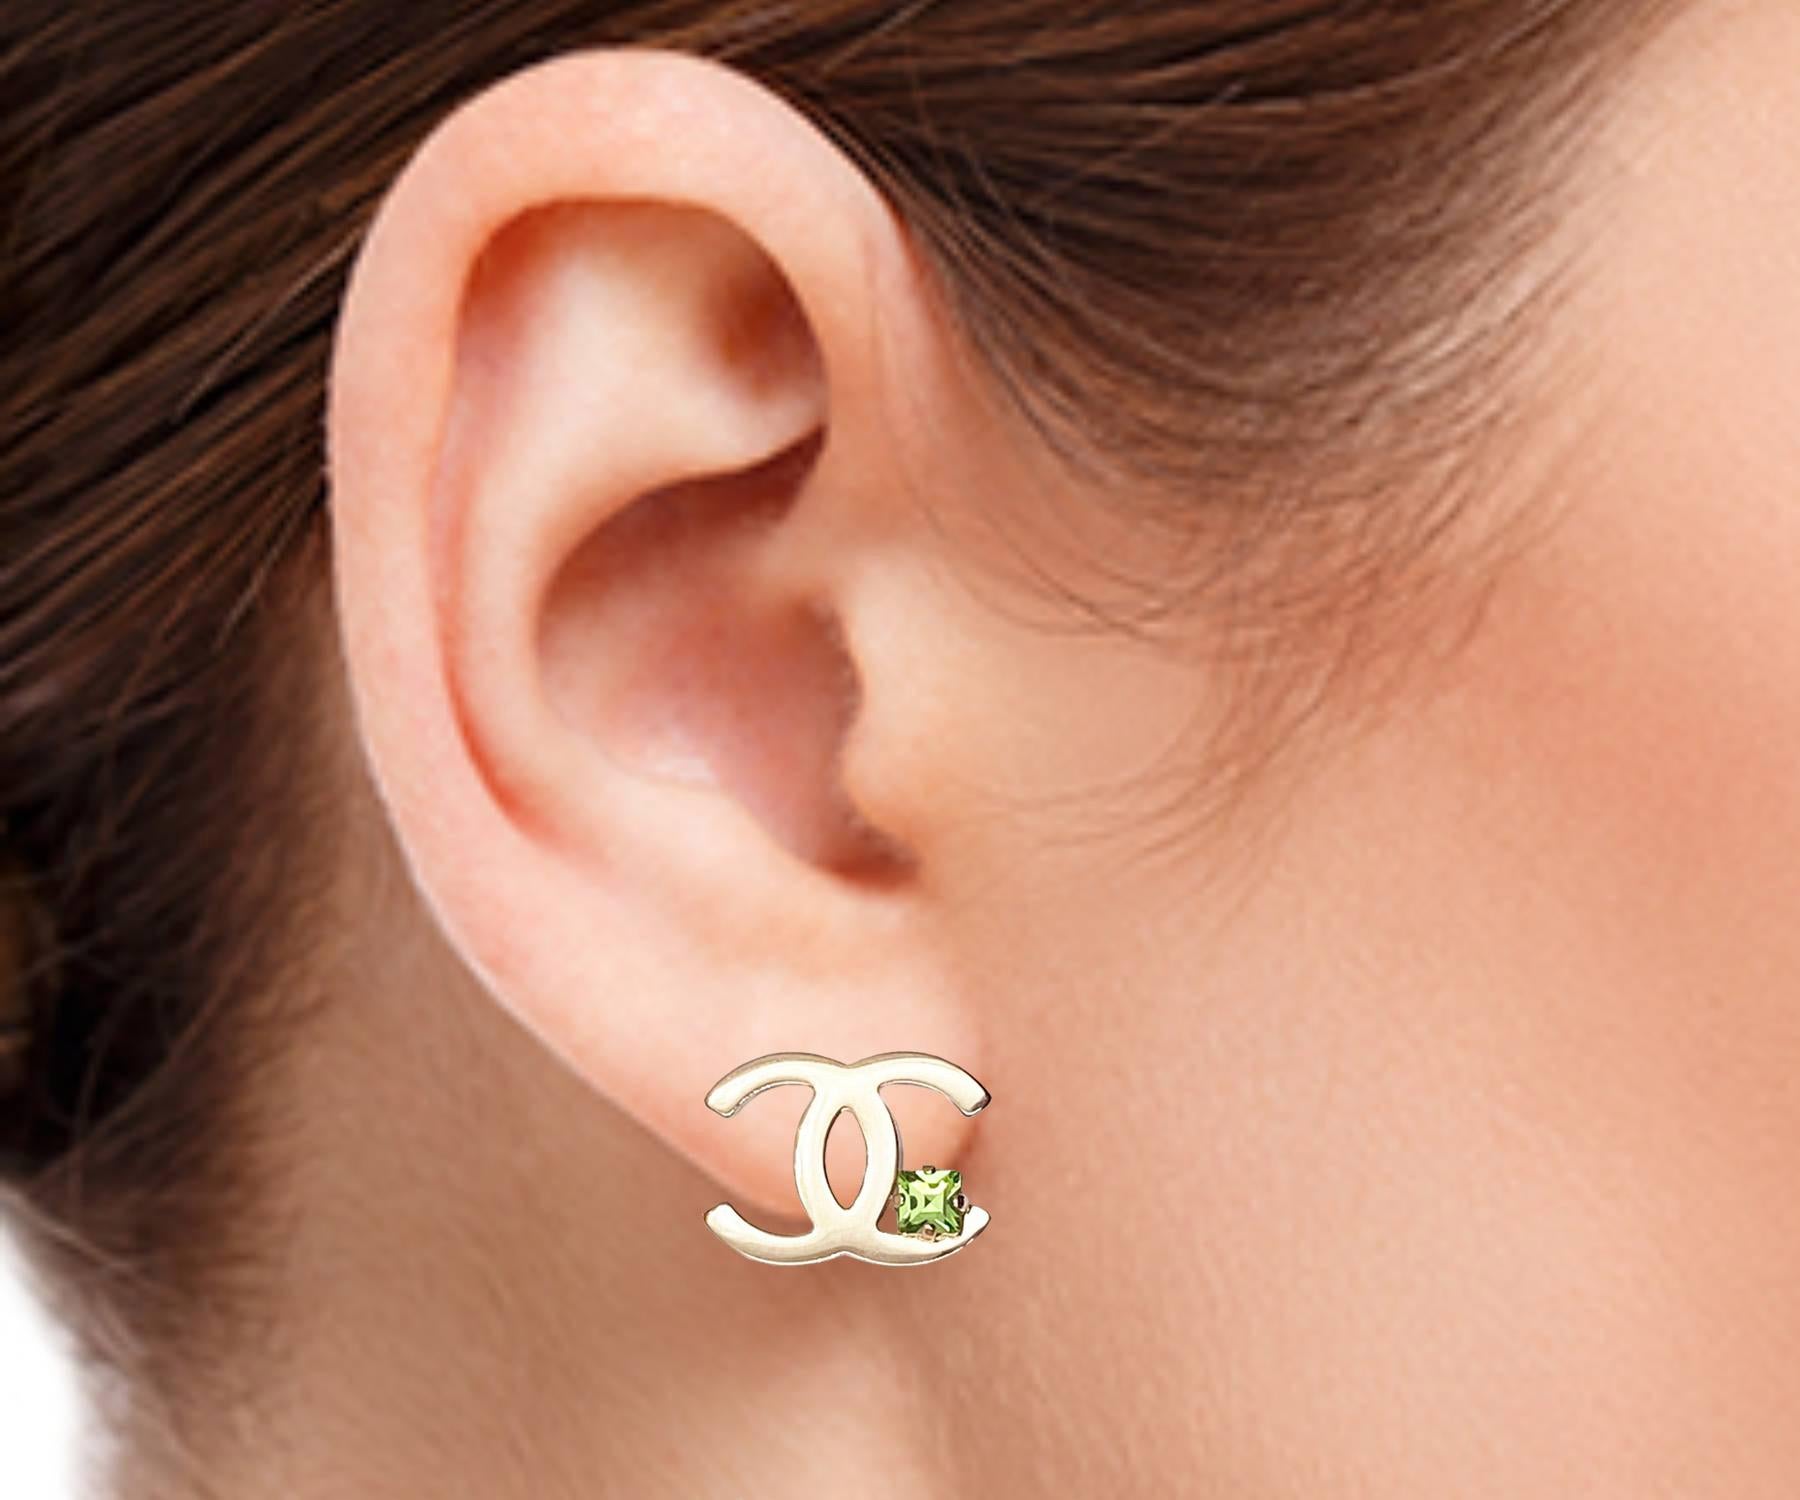 Chanel Light Gold CC Corner Green Crystal Piercing Earrings  In Excellent Condition For Sale In Pasadena, CA